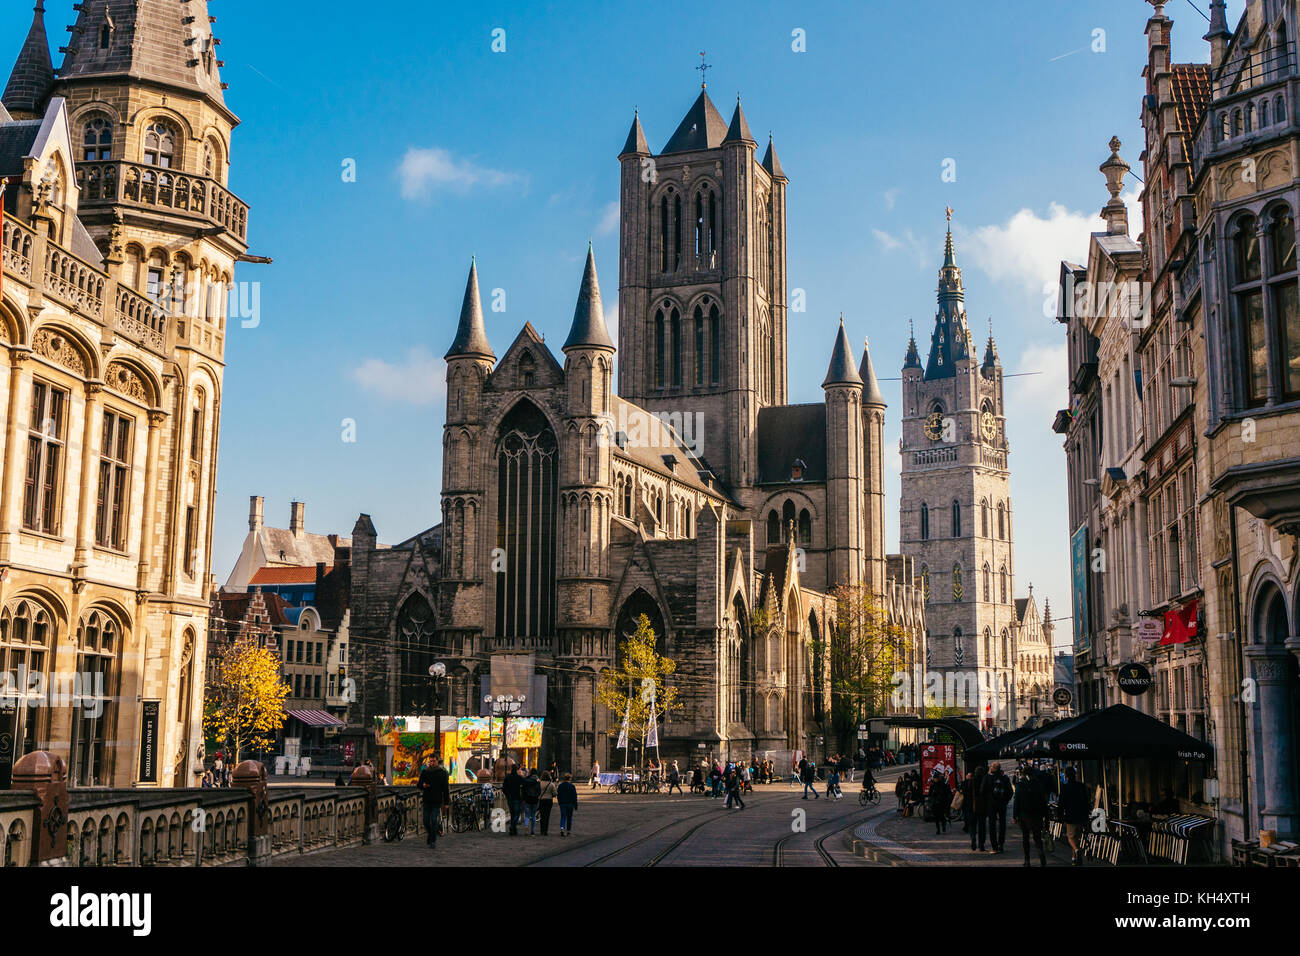 GHENT, BELGIUM - November, 2017: Architecture of Ghent city center. Ghent is medieval city and point of tourist destination in Belgium. Stock Photo